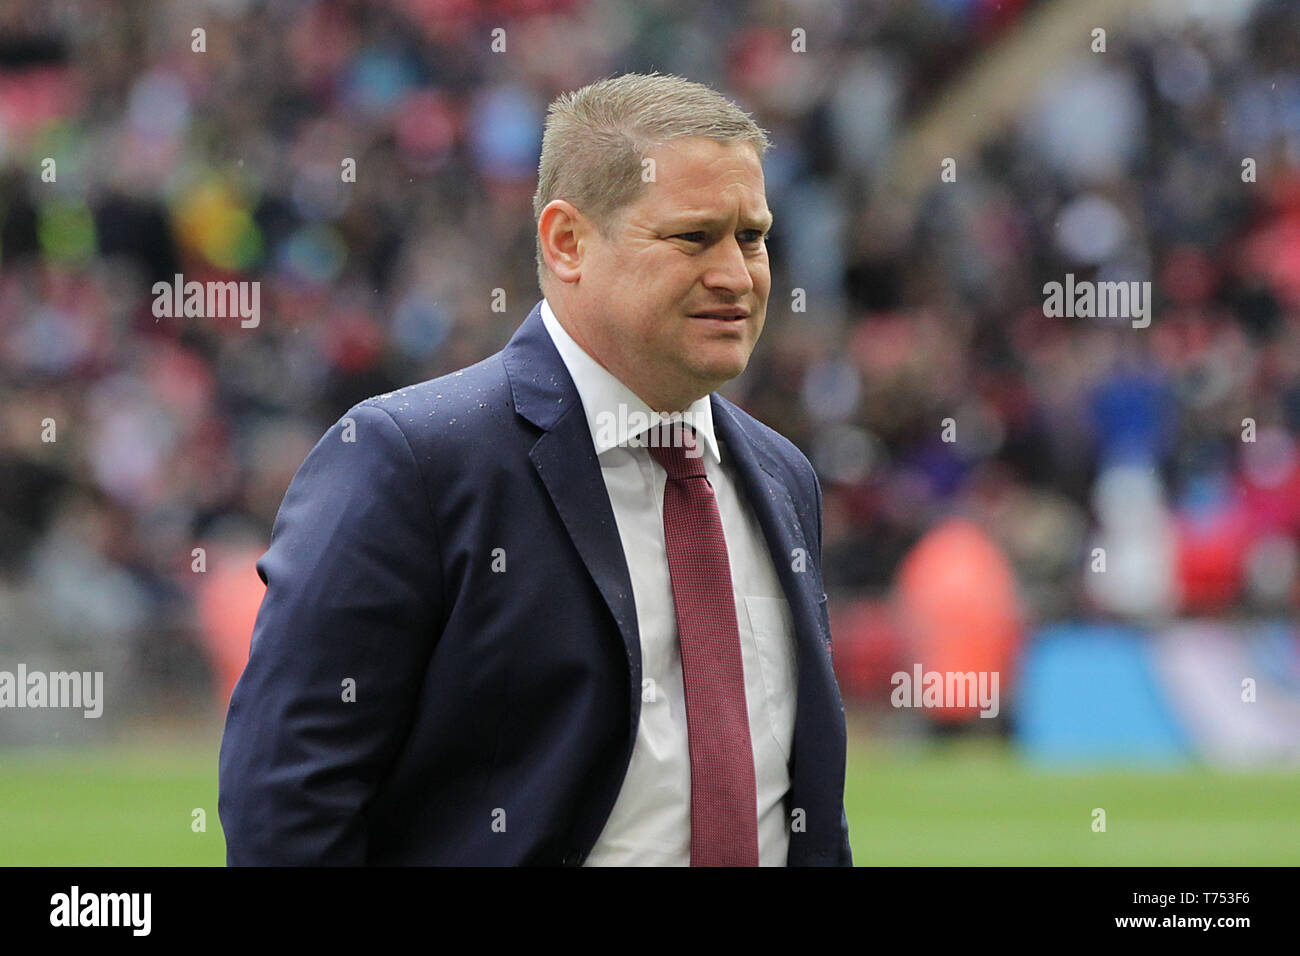 London, UK. 04th May, 2019. London, UK. 04th May, 2019. London, UK. 04th May, 2019. West Ham Manager Matt Beard during the FA Women's Cup Final match between Manchester City Women and West Ham United Ladies at Wembley Stadium on May 4th 2019 in London, England. (Credit: PHC Images/Alamy Live News Credit: PHC Images/Alamy Live News Credit: PHC Images/Alamy Live News Stock Photo